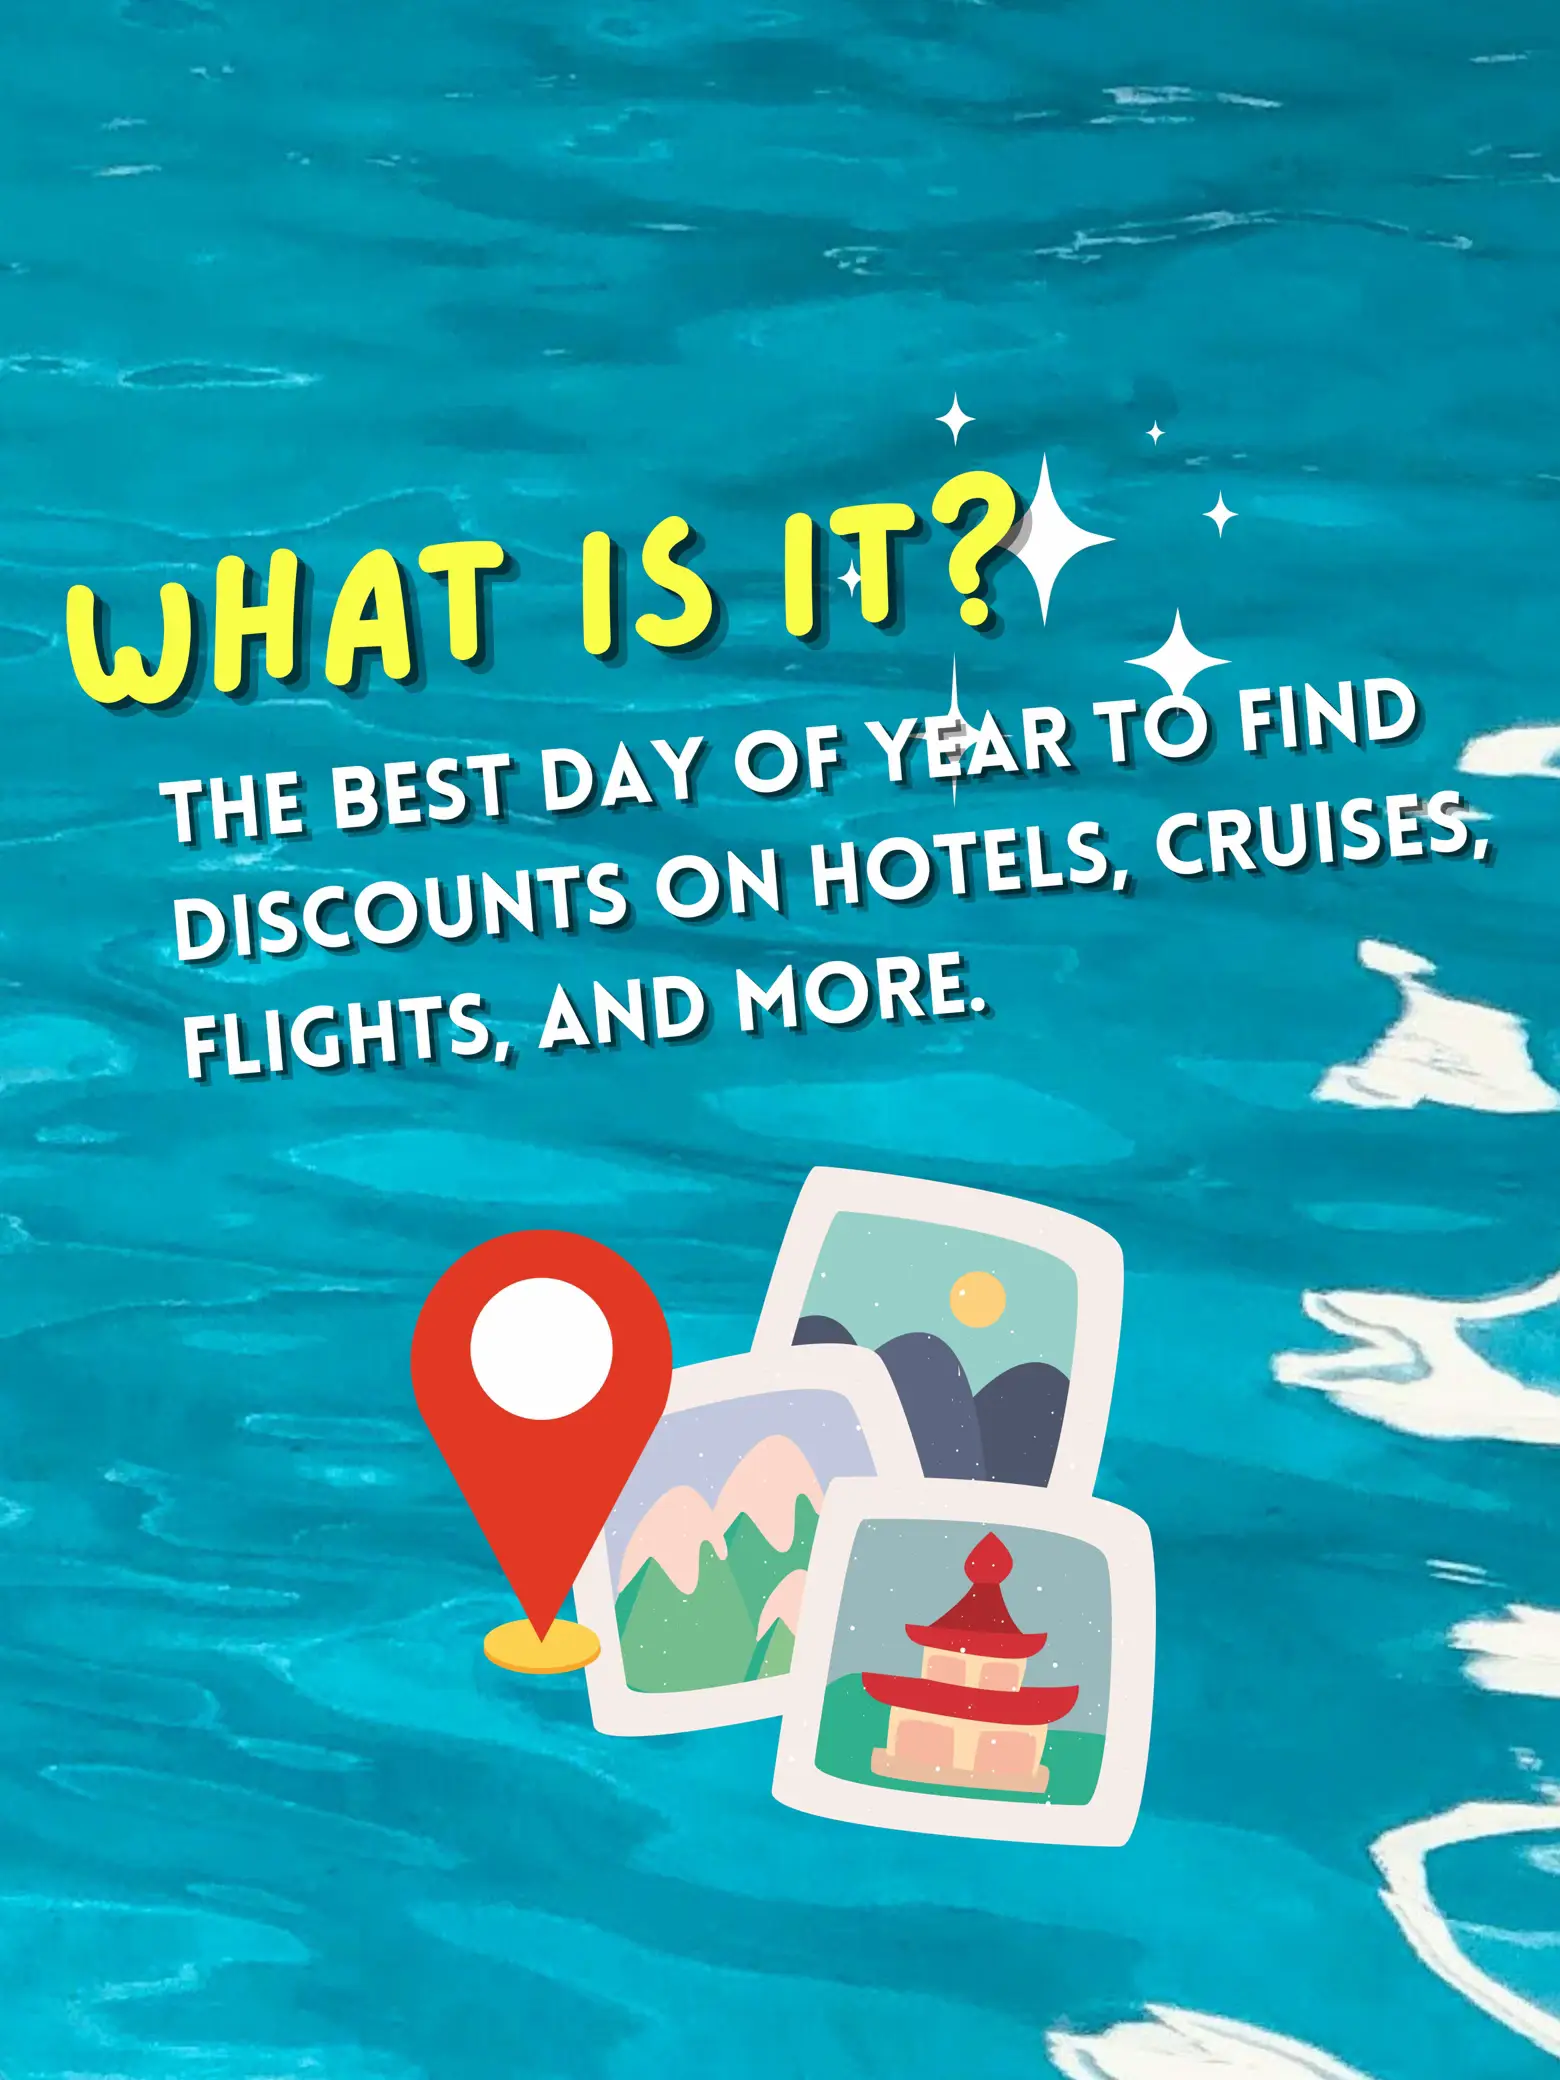 Travel Tuesday: Get the best deals on flights, cruises, more